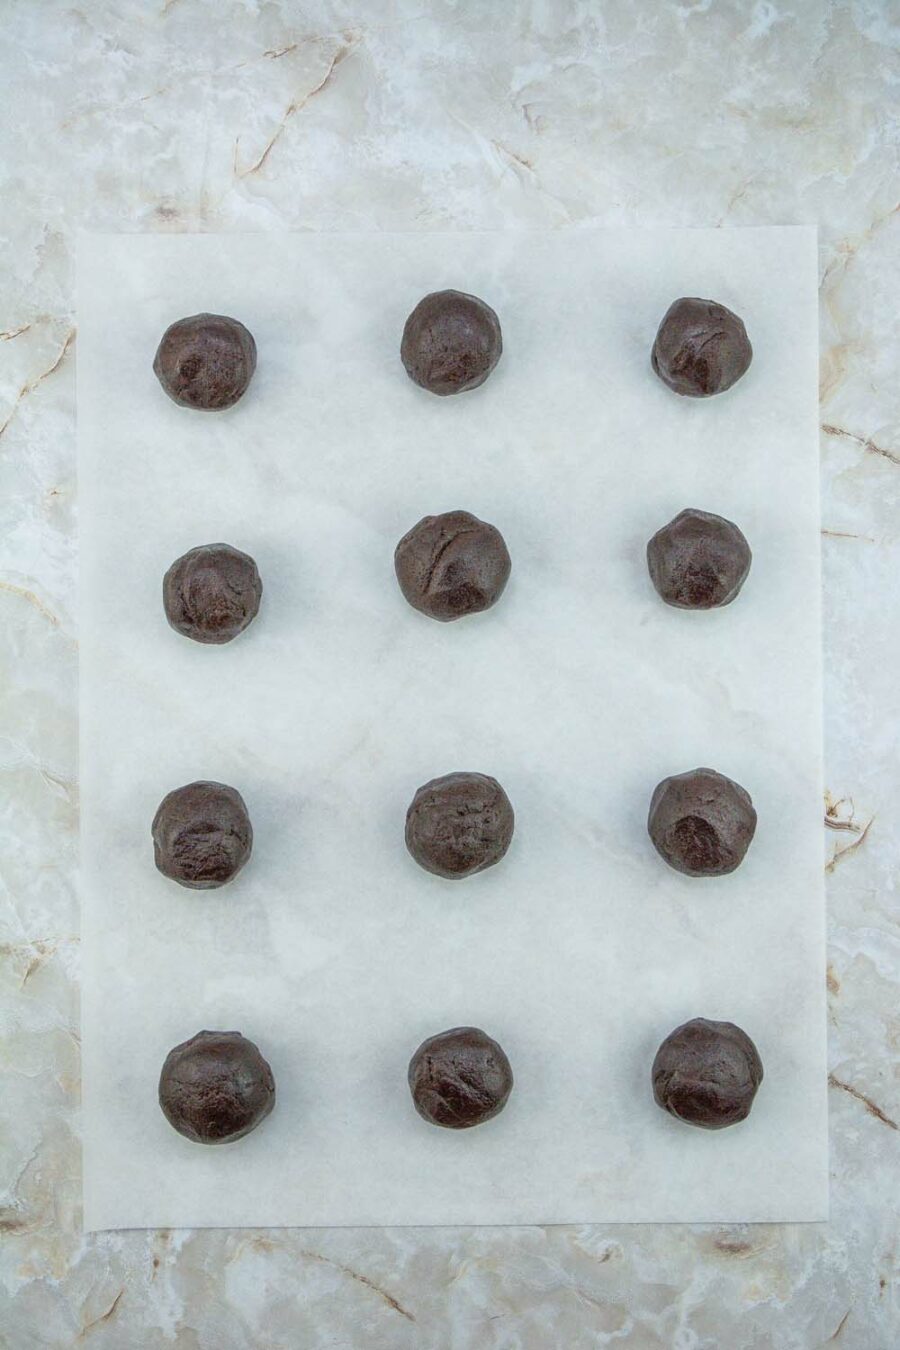 Chocolate Peppermint Cookie dough in balls on parchment paper